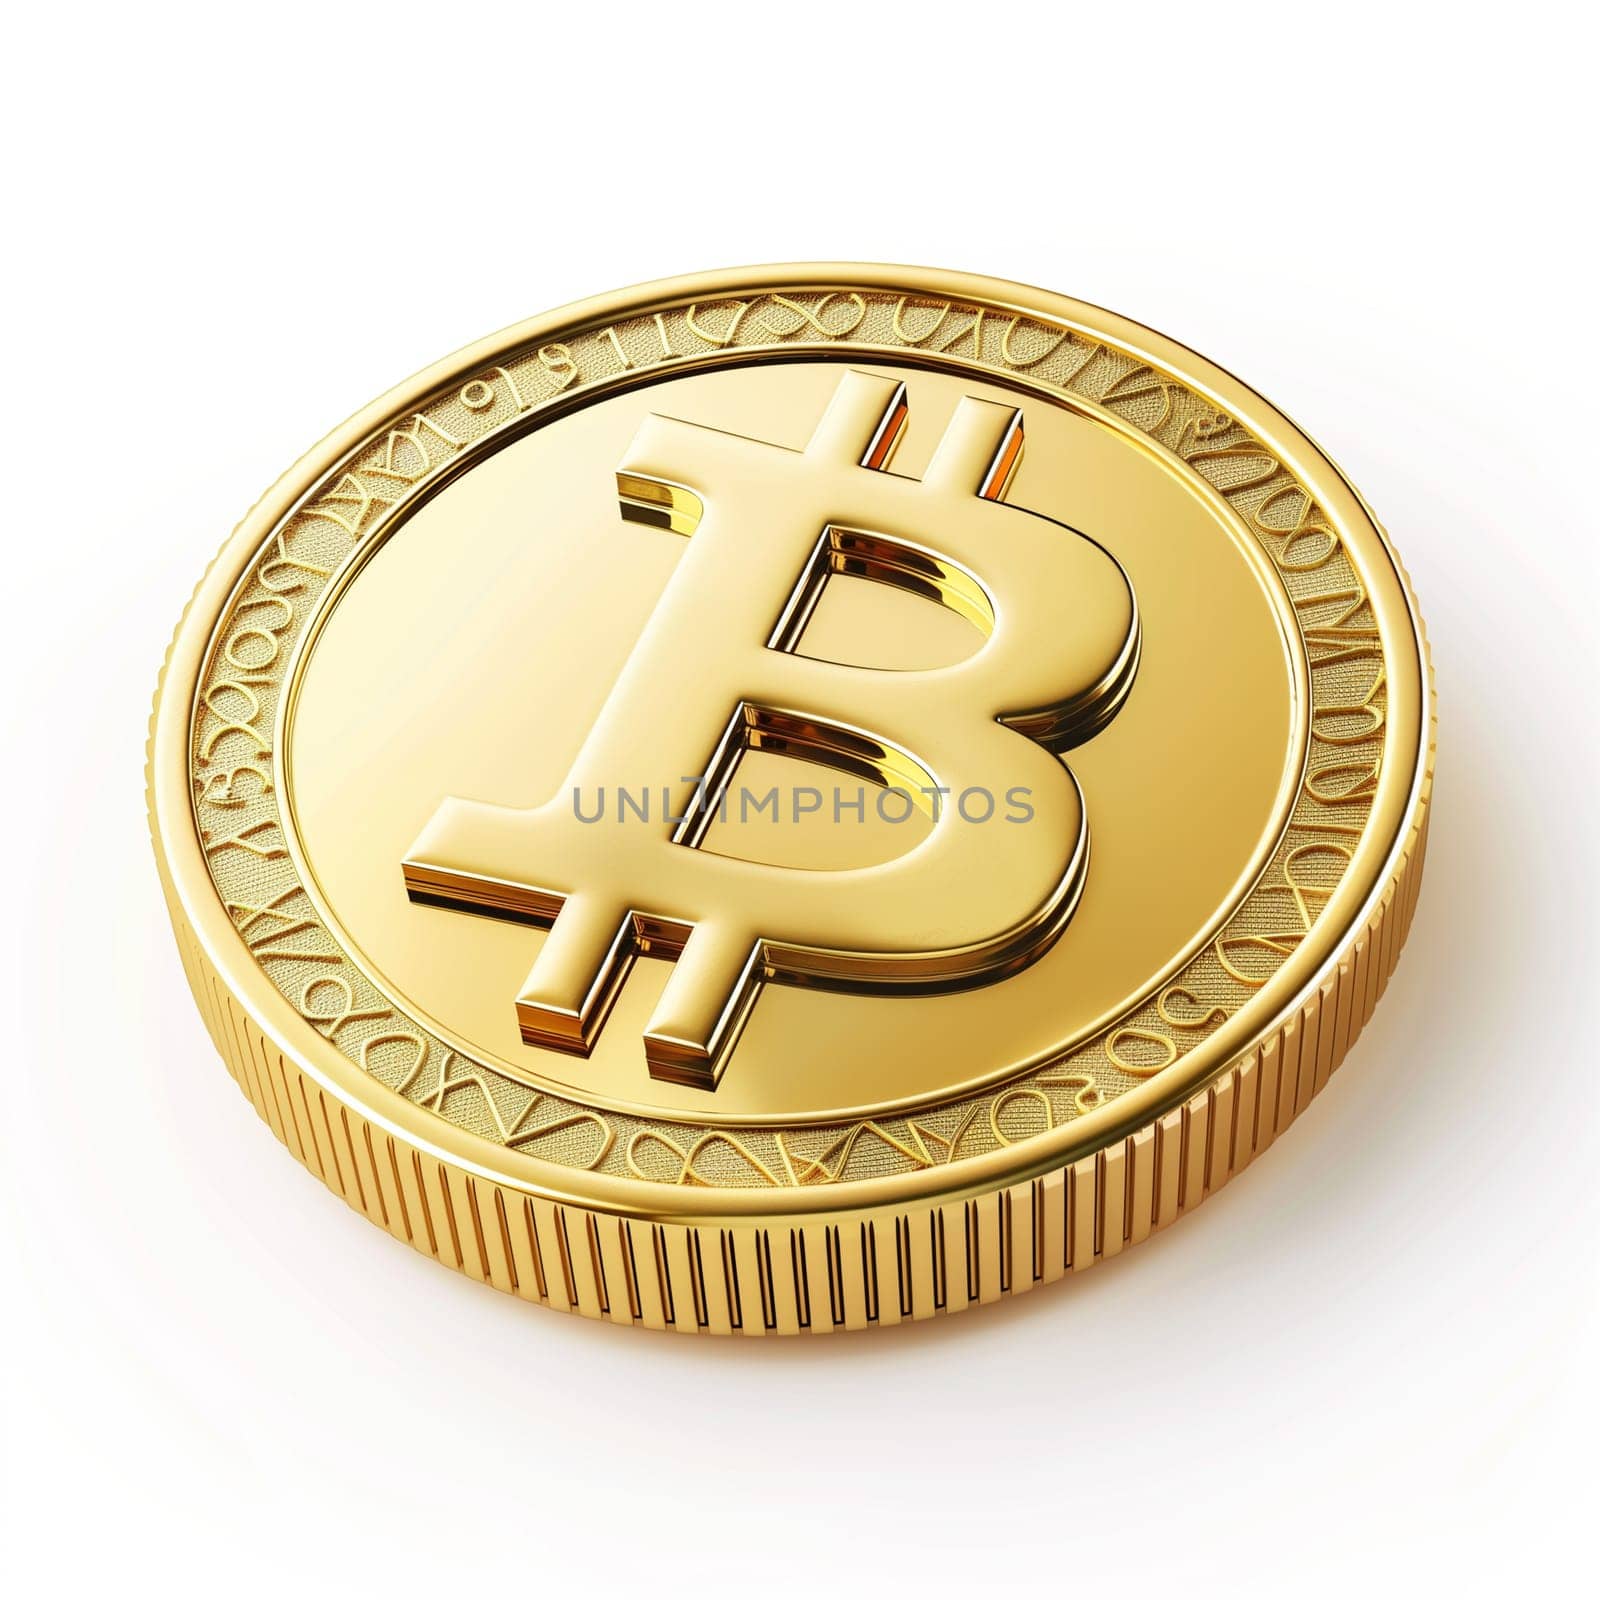 Bitcoin. Golden bitcoin isolated on white background